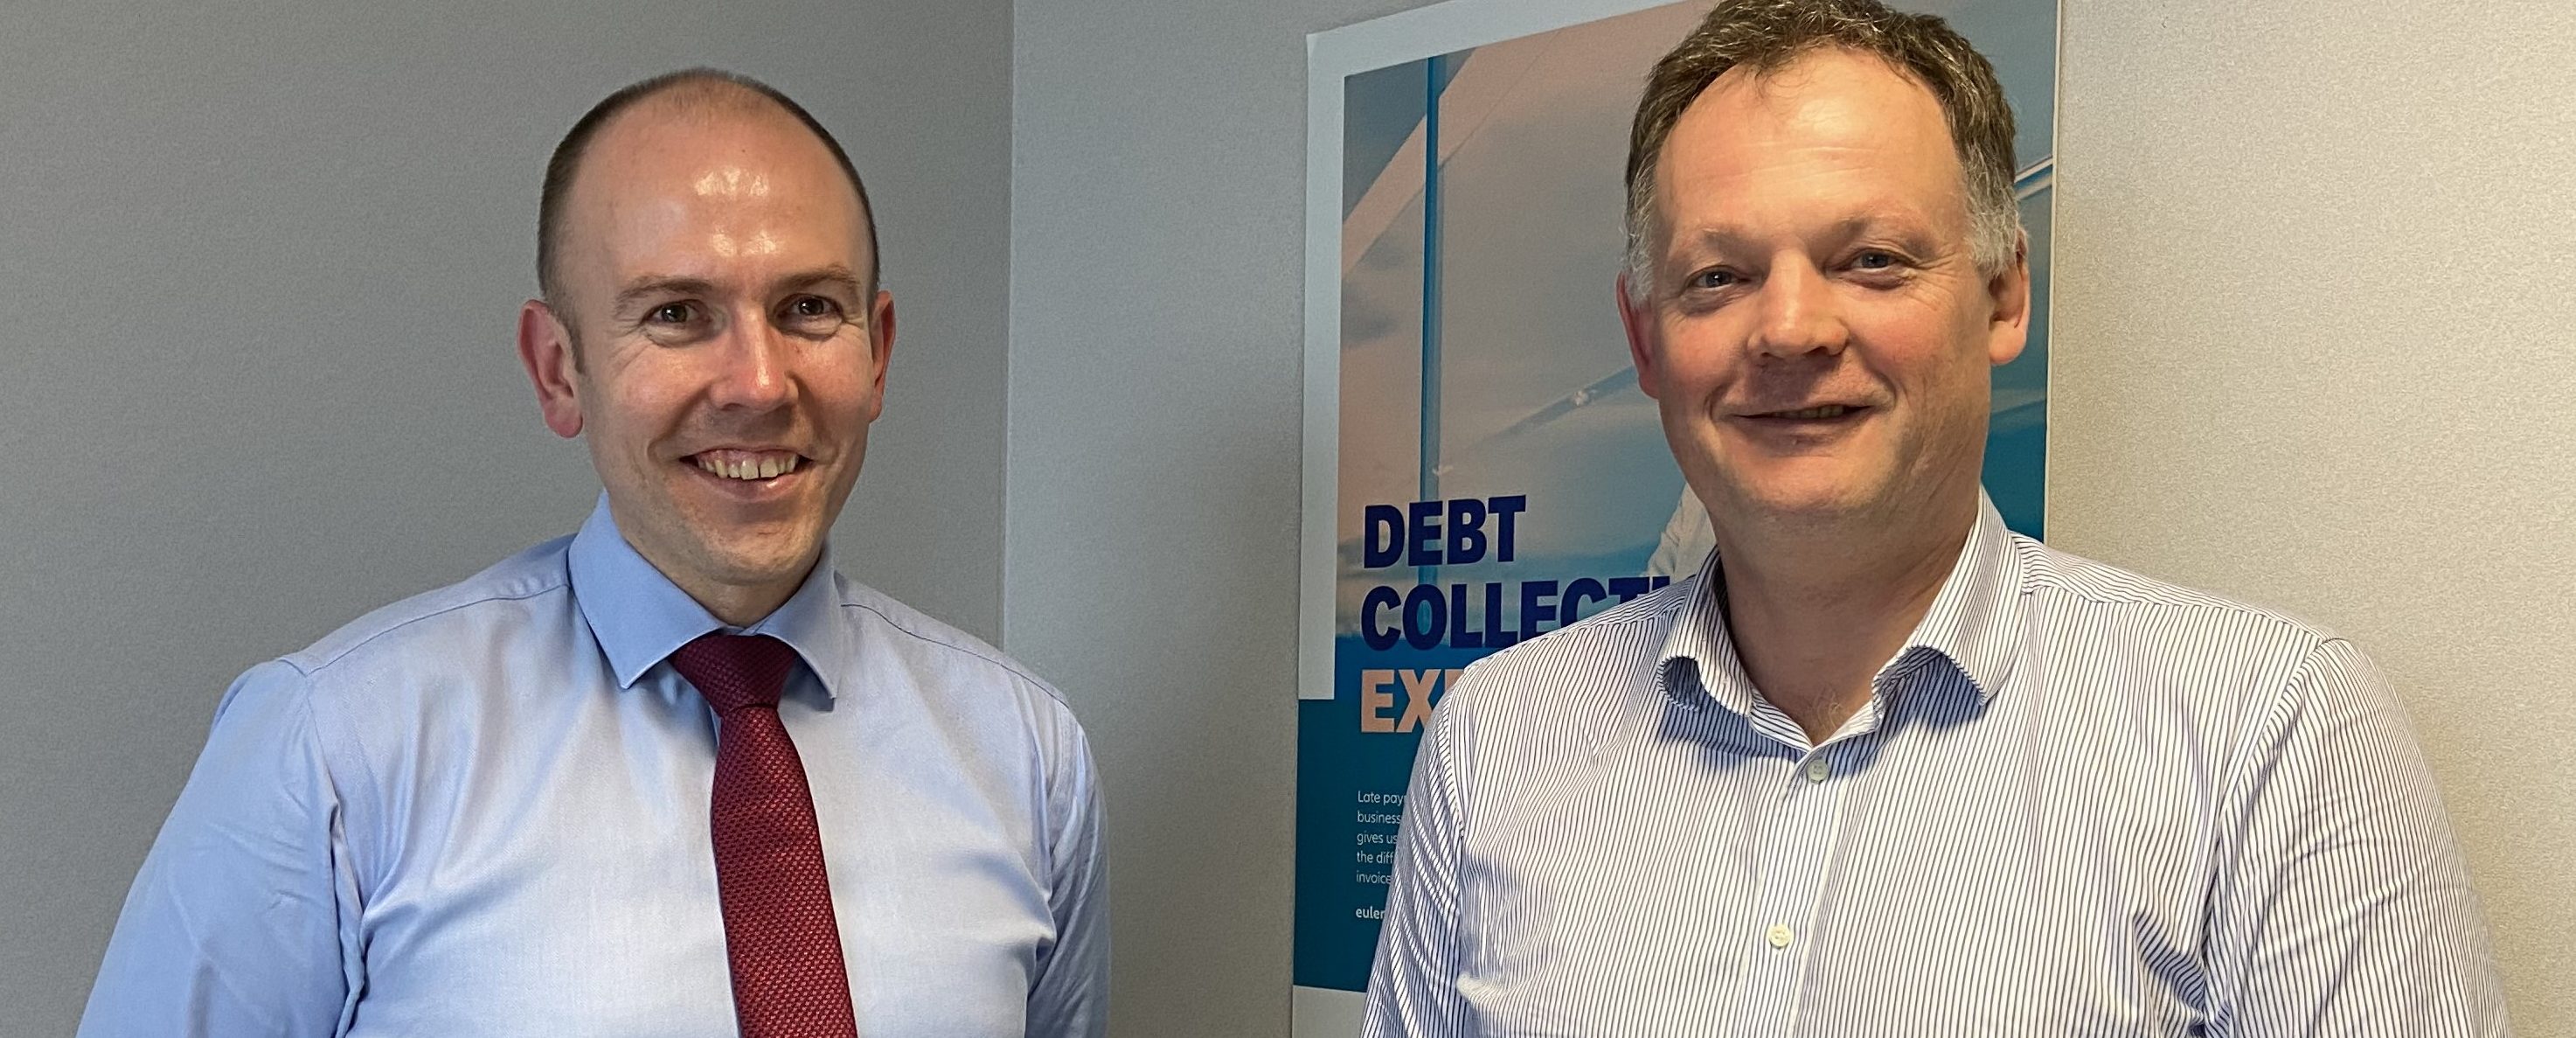 CEO Milo Bogaerts and Kris Macauley, Director of Risk, Information, Claims & Collections